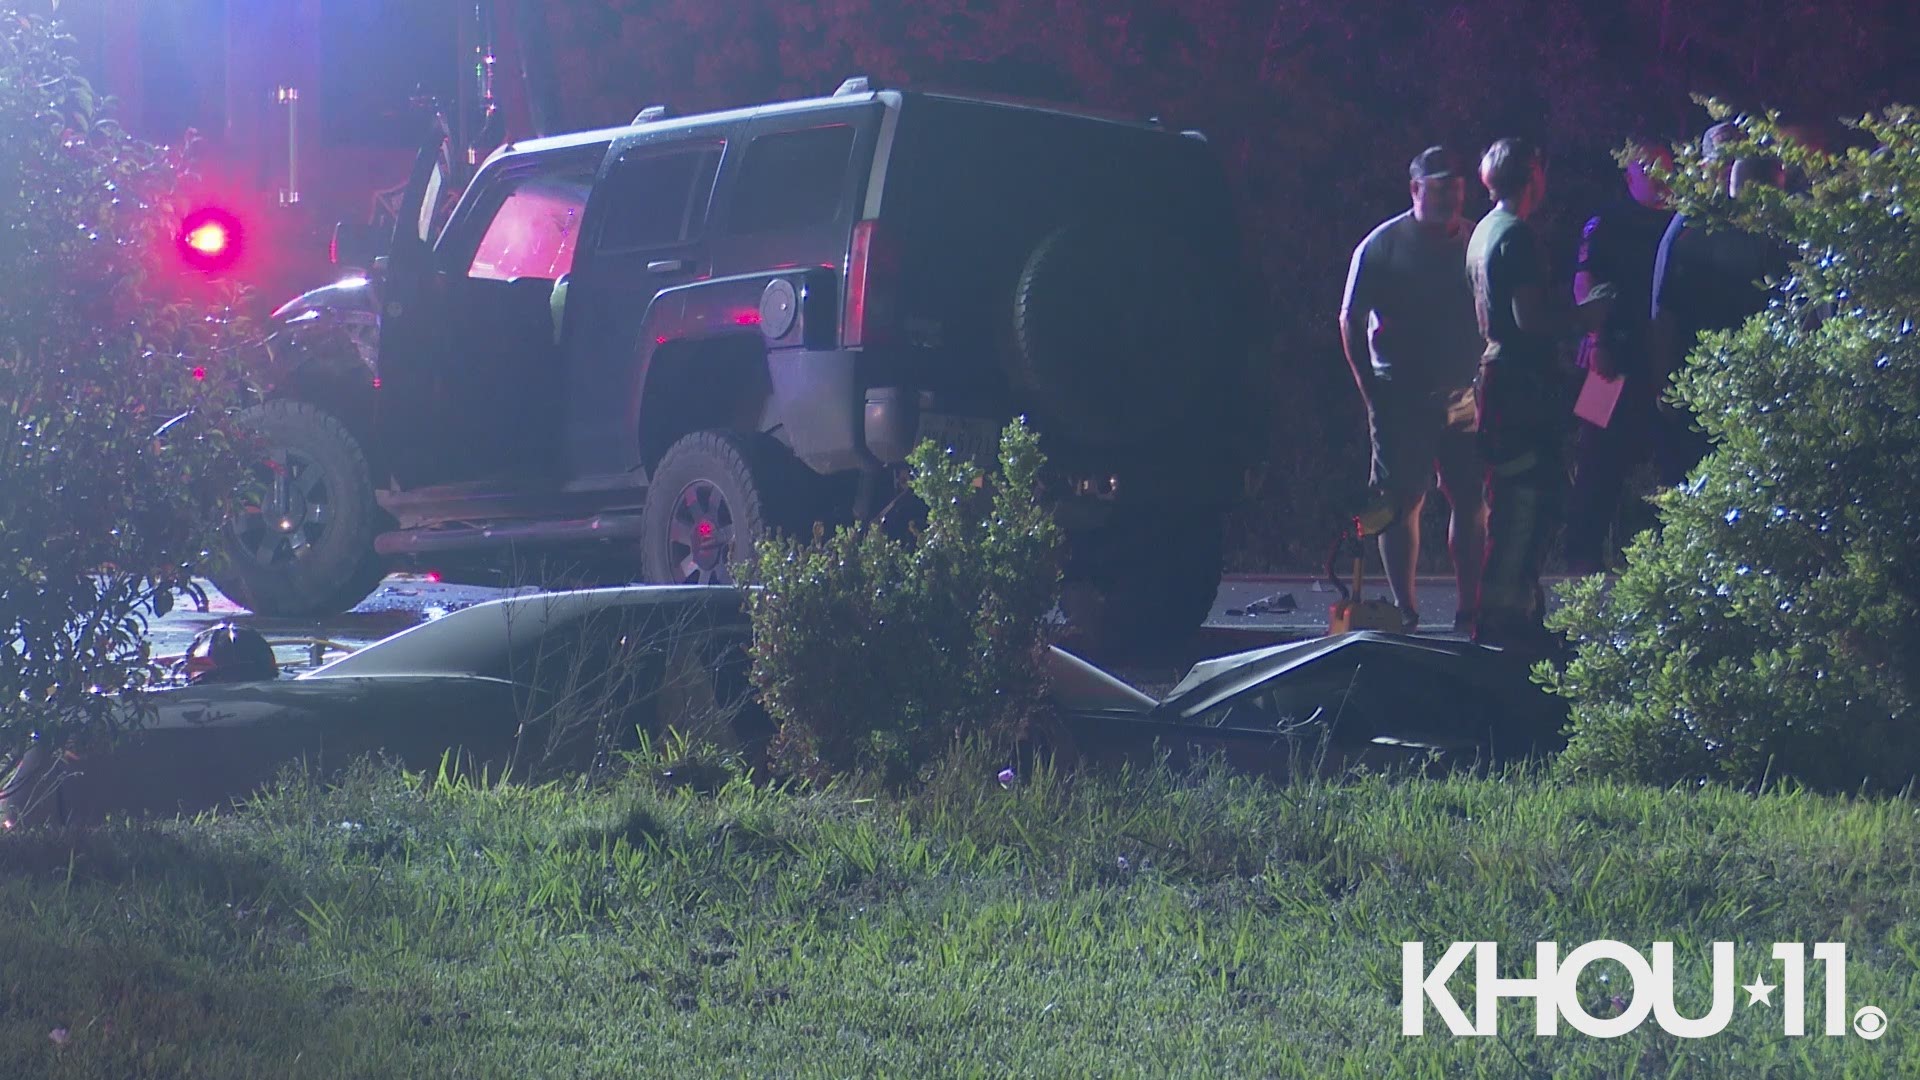 A woman was flown to an area hospital in critical condition after a head-on collision in east Harris County.